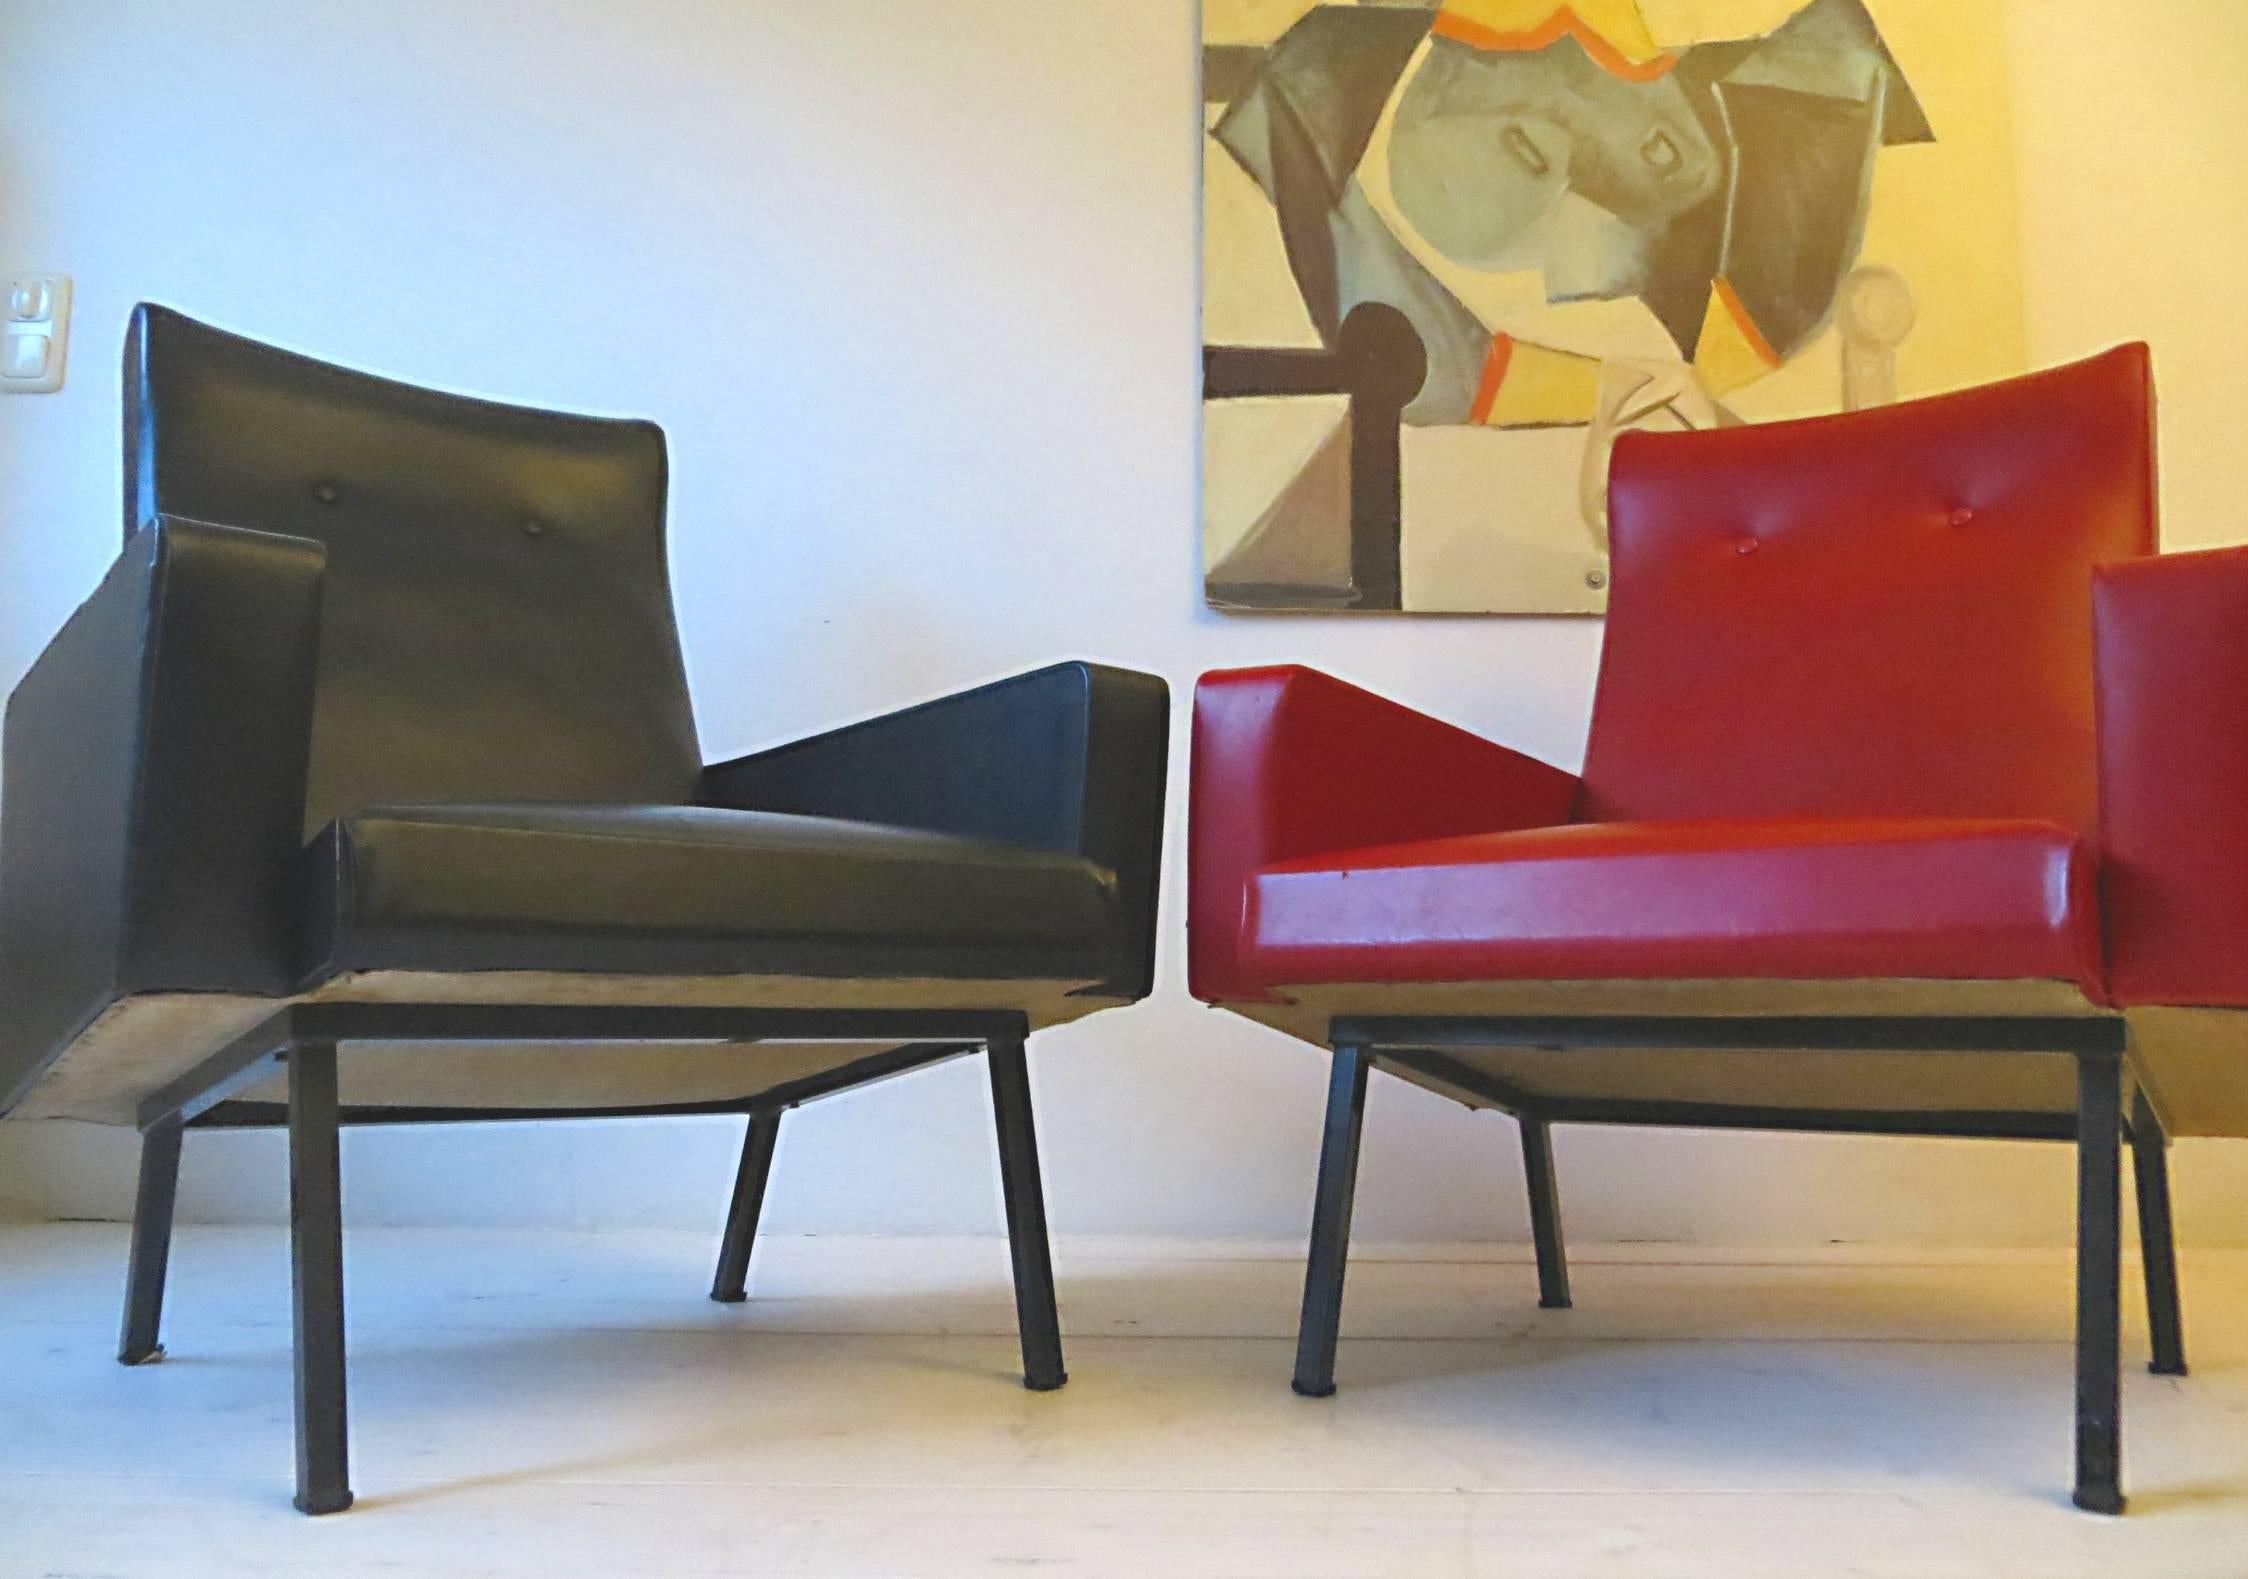 Pair of 1950s French Vintage Armchairs Lounge Chairs Style of Pierre Guariche im Zustand „Gut“ im Angebot in Hamburg, DE